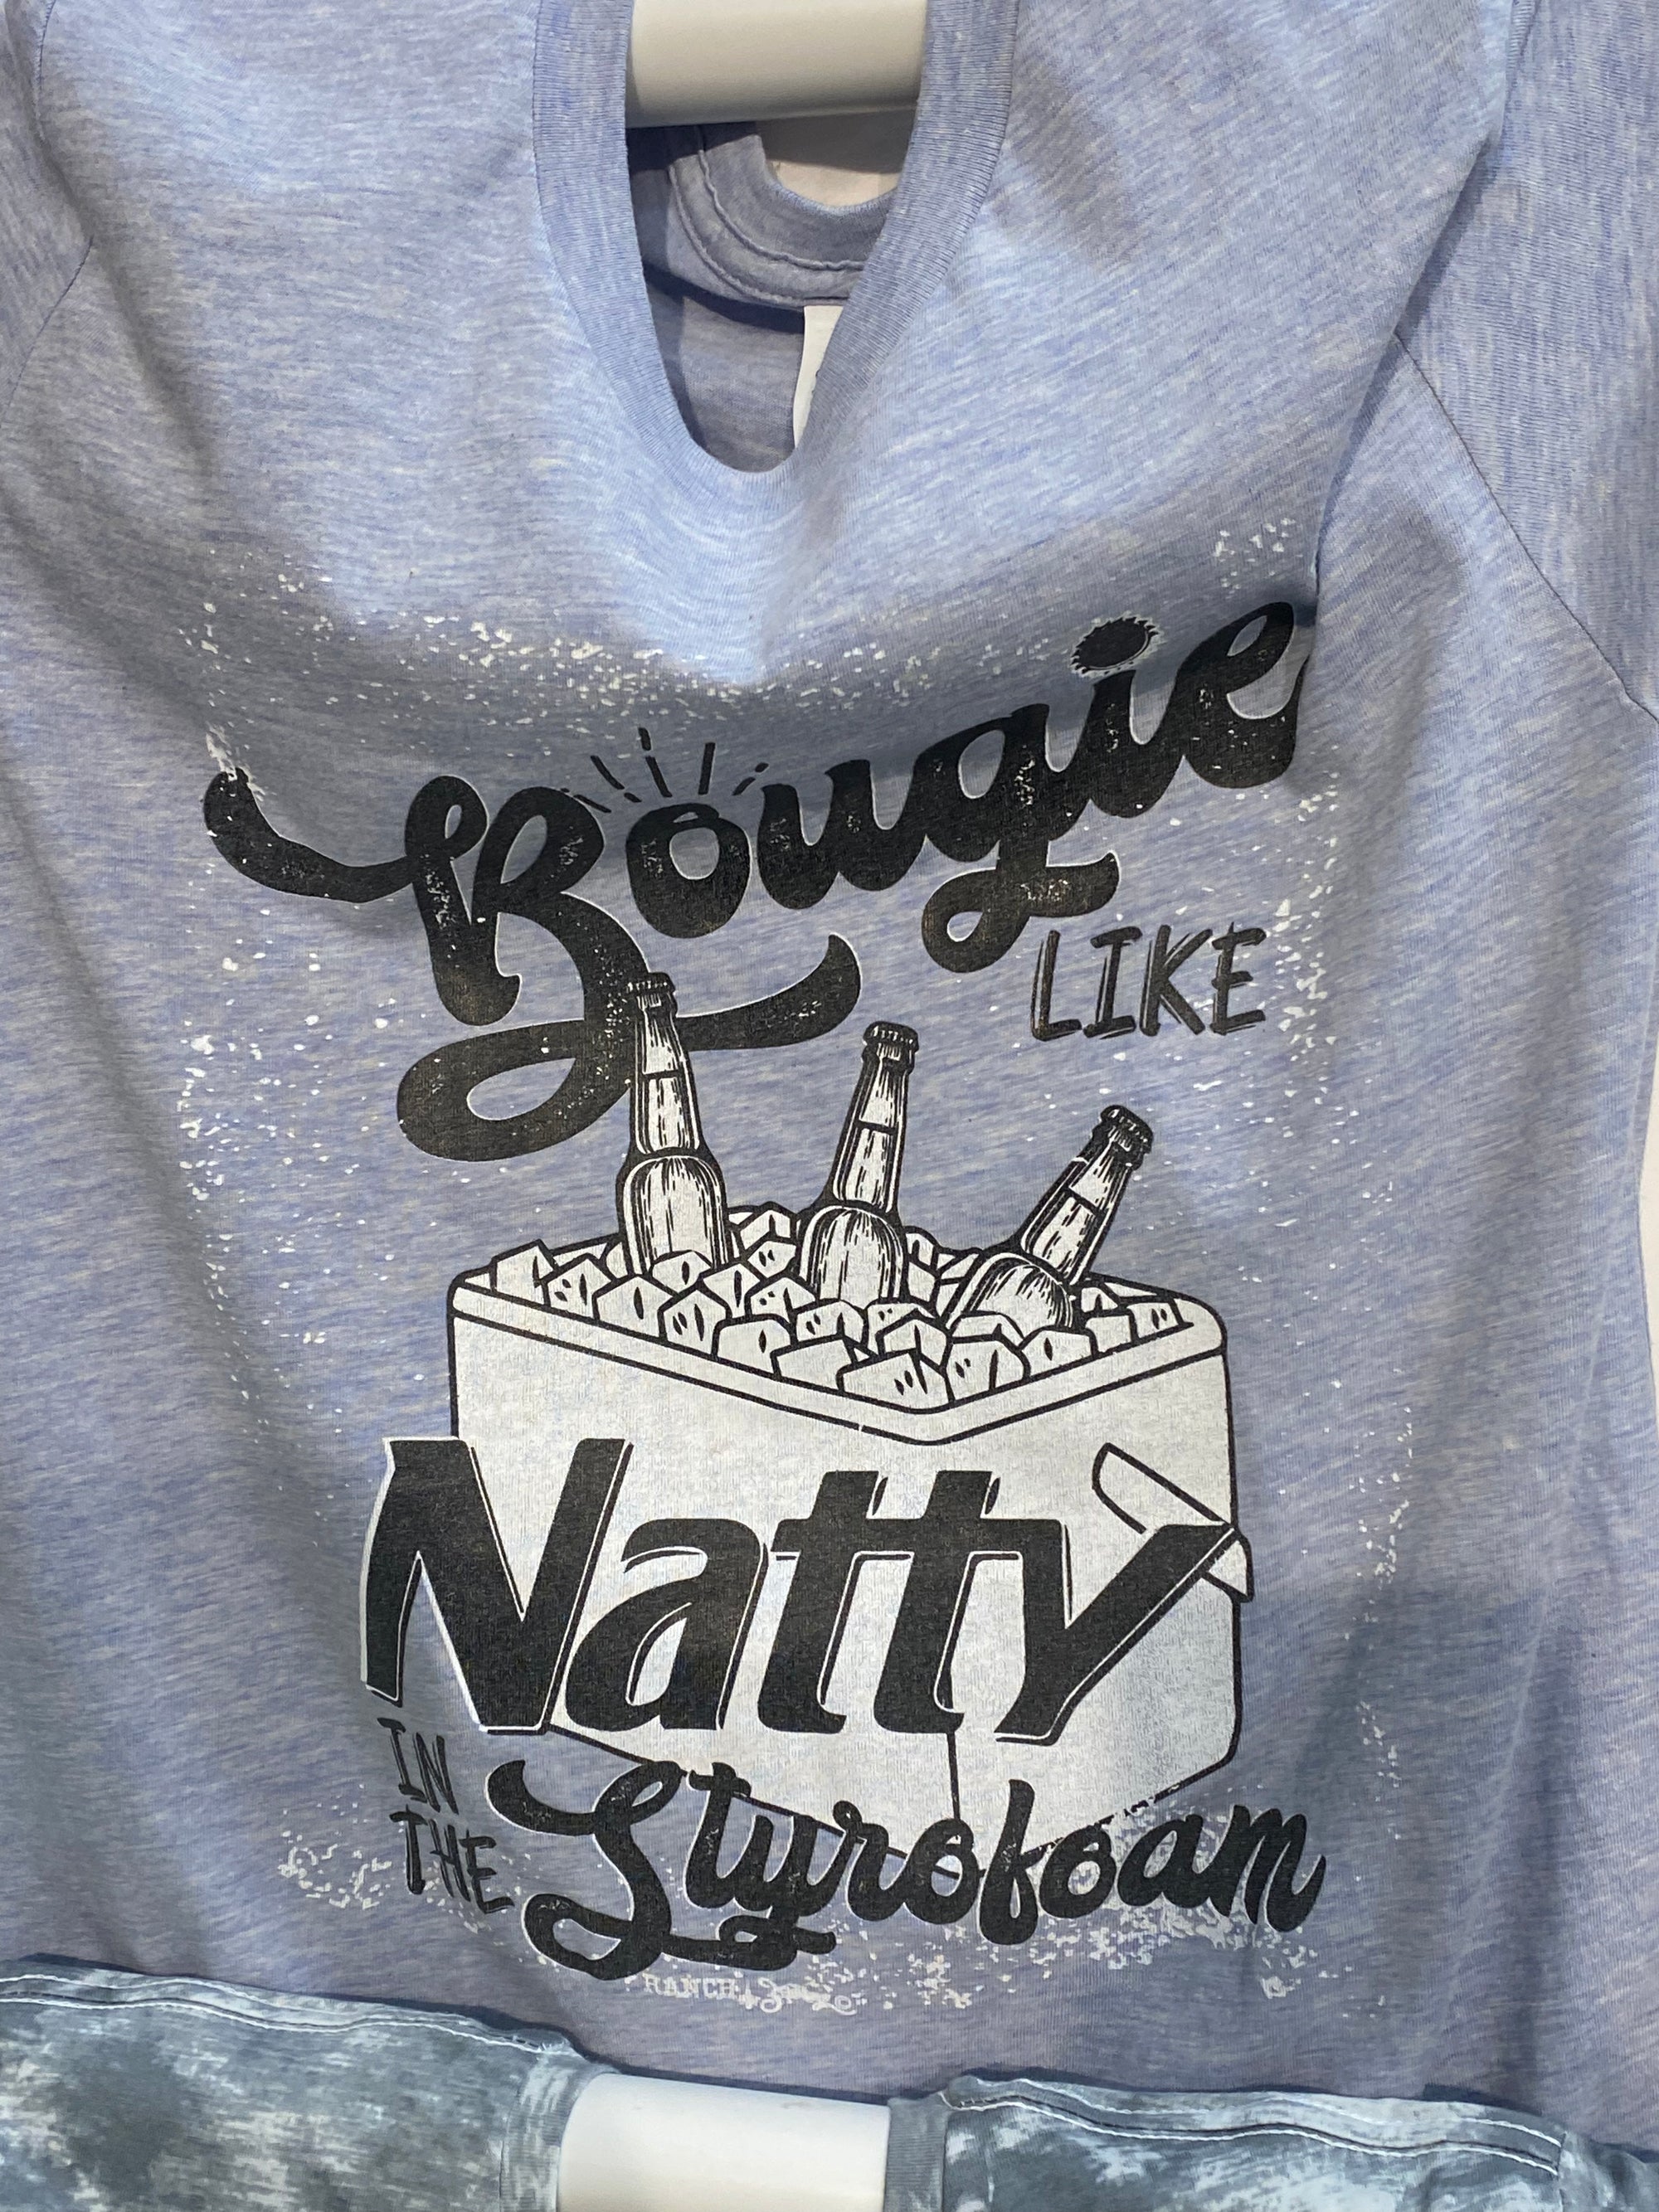 Bougie Like Natty Graphic Tee-graphic tee-Branded Envy